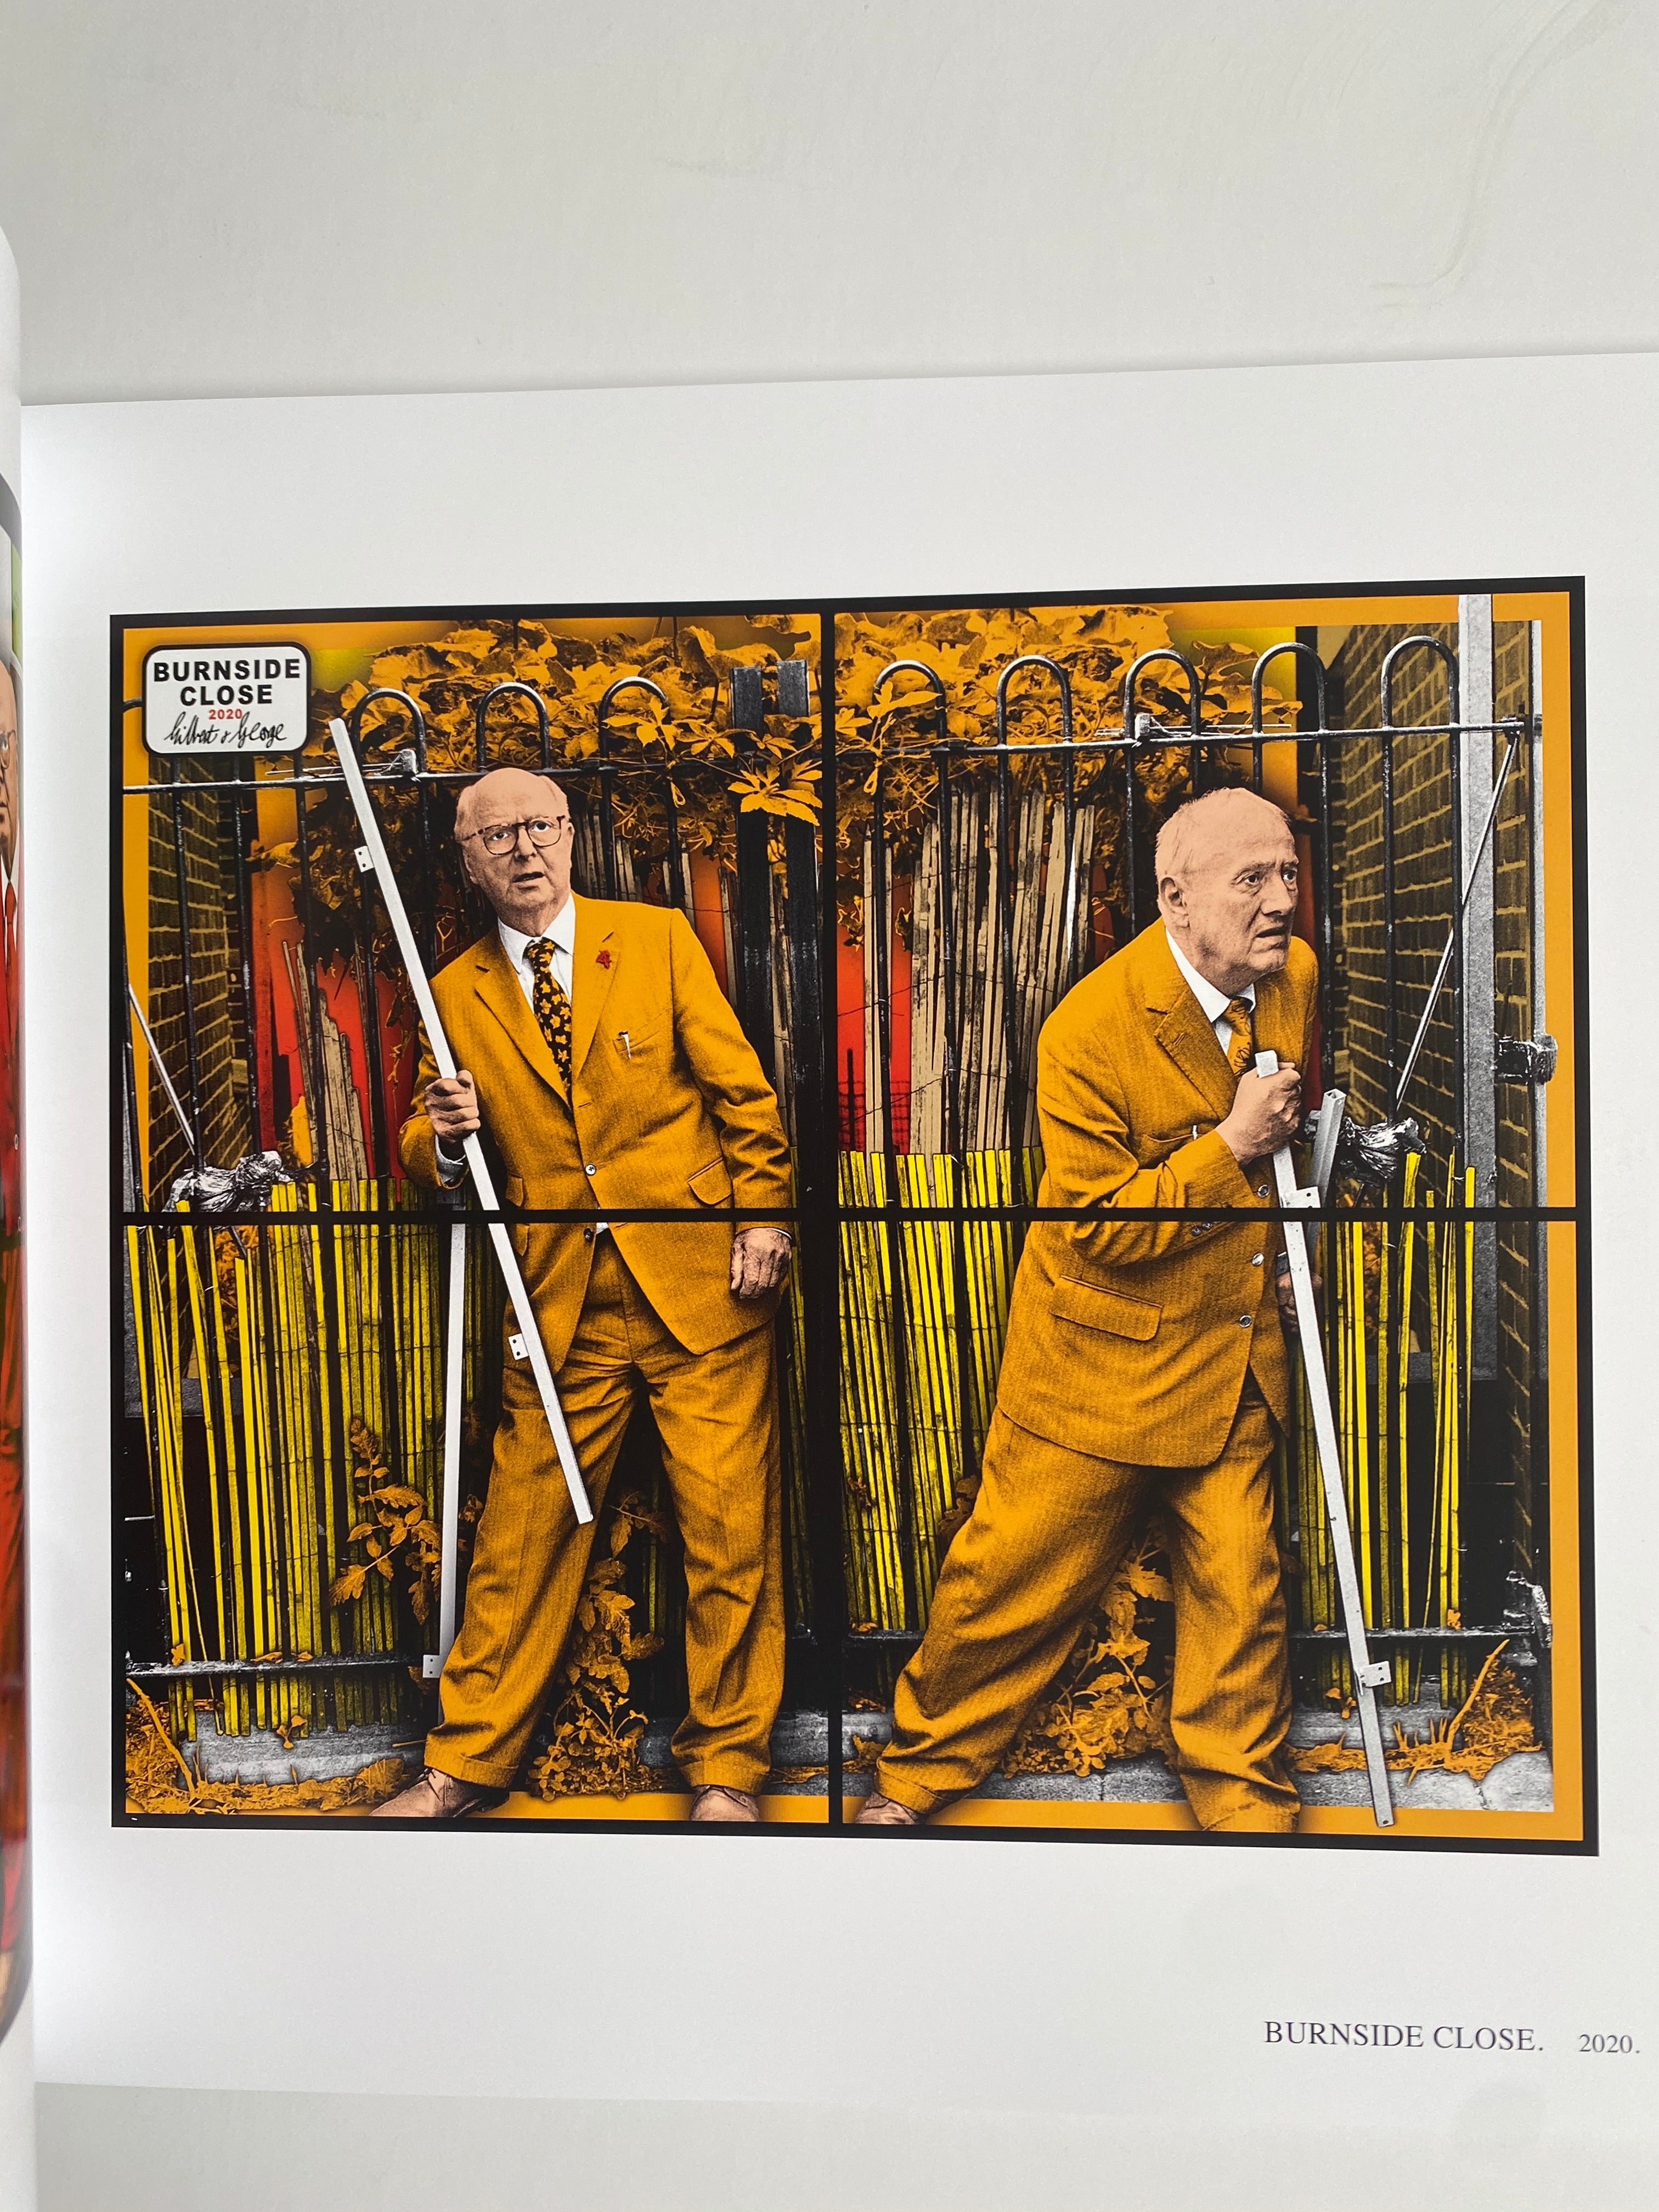 Gilbert & George | New Normal Pictures